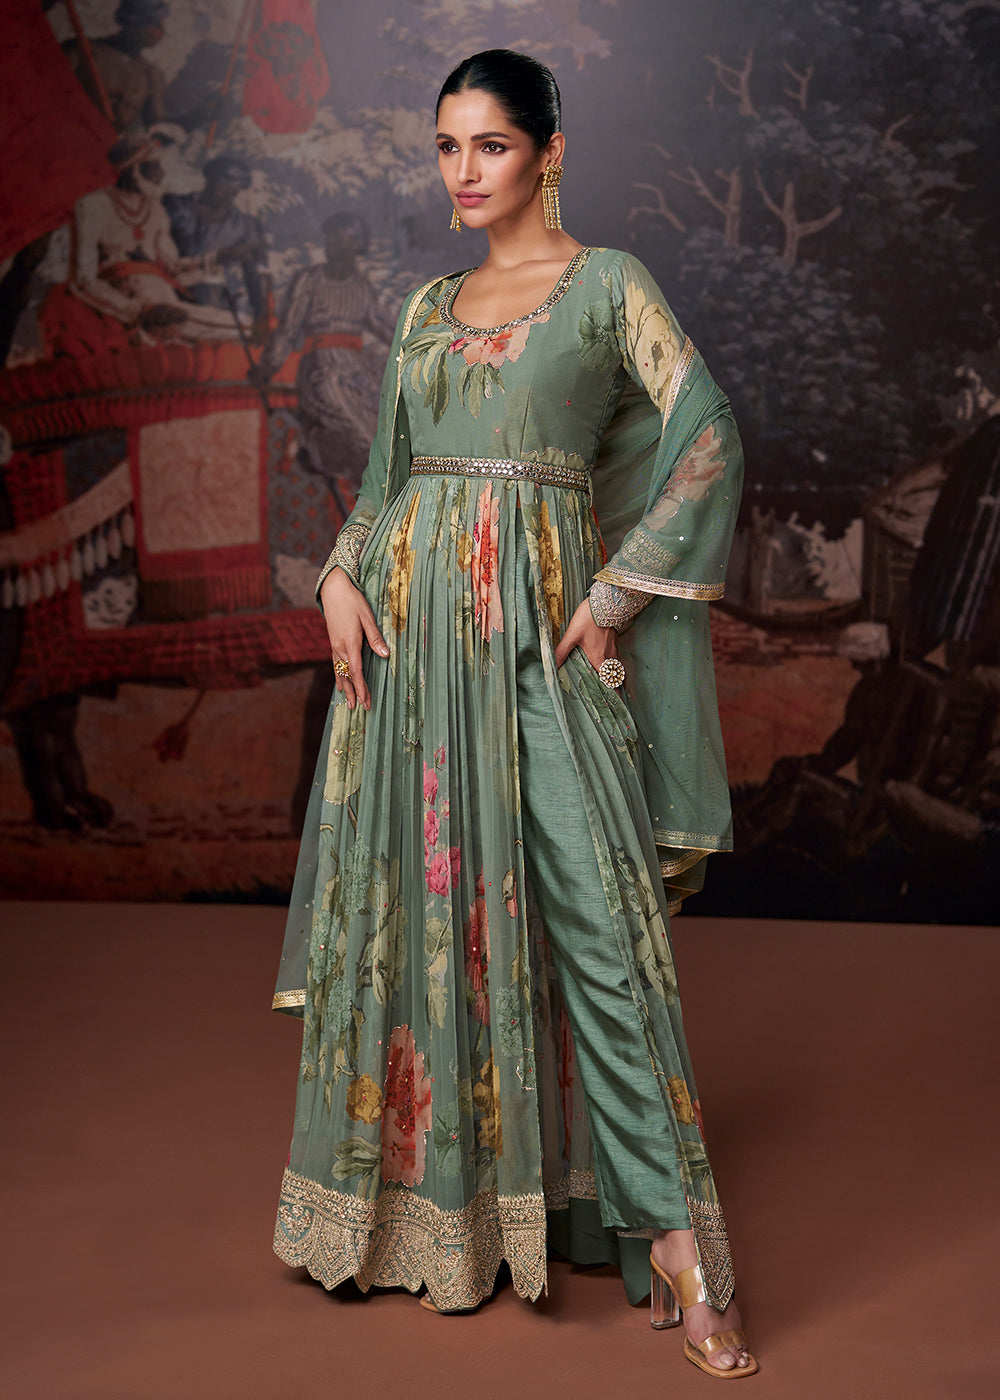 Buy Now Sage Green Printed & Embroidered Wedding Anarkali Dress Online in USA, UK, Australia, New Zealand, Canada & Worldwide at Empress Clothing.